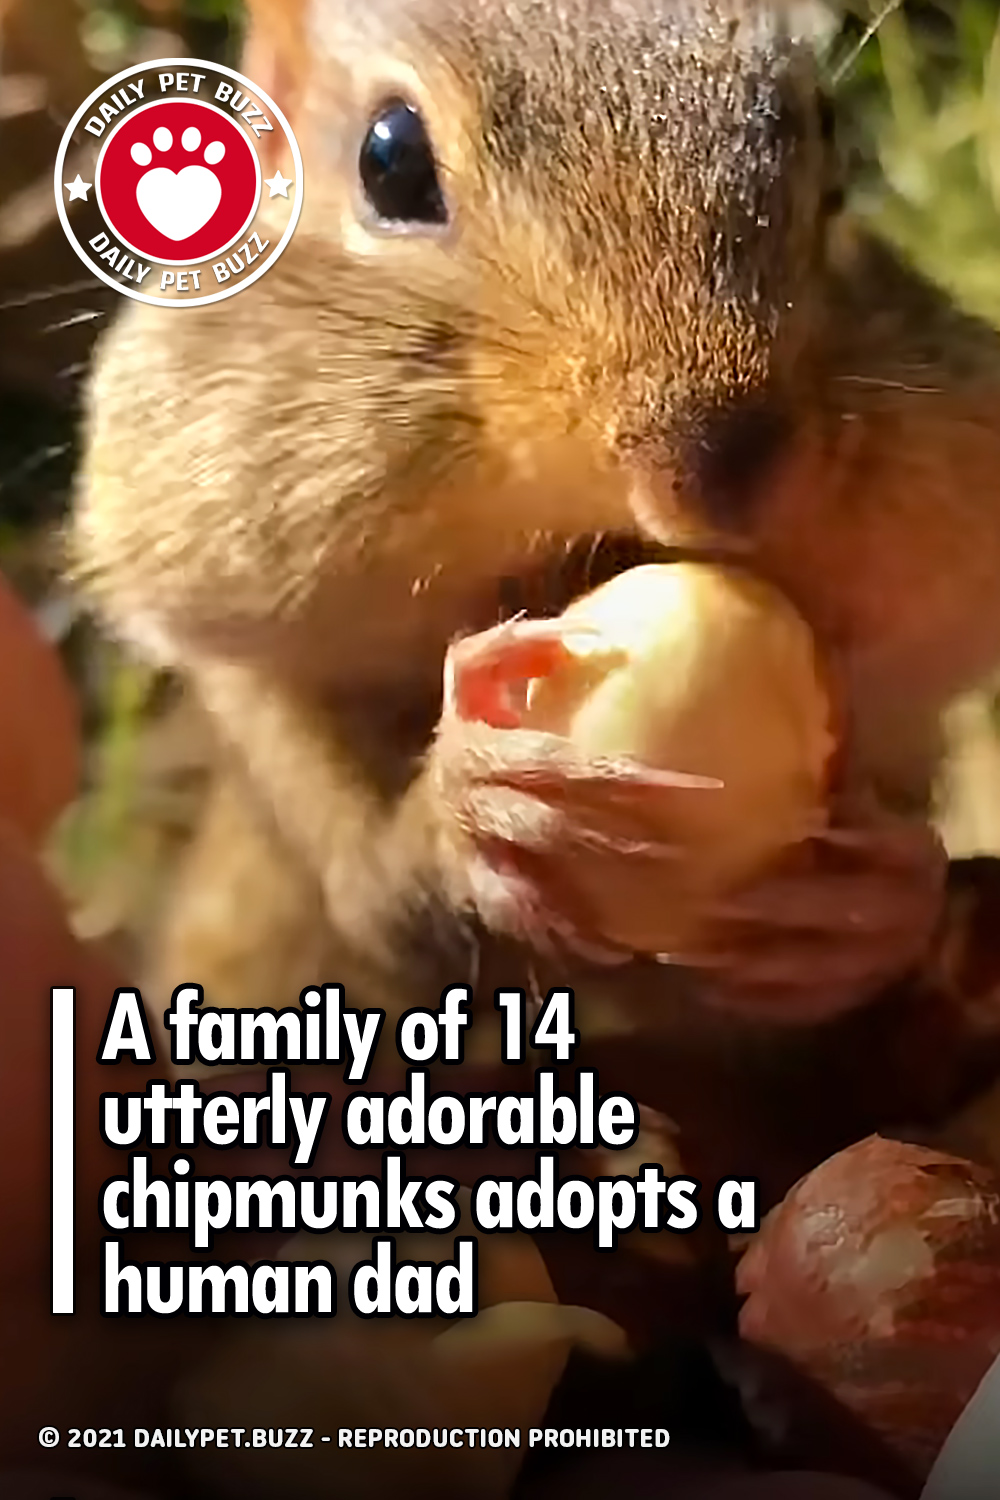 A family of 14 utterly adorable chipmunks adopts a human dad